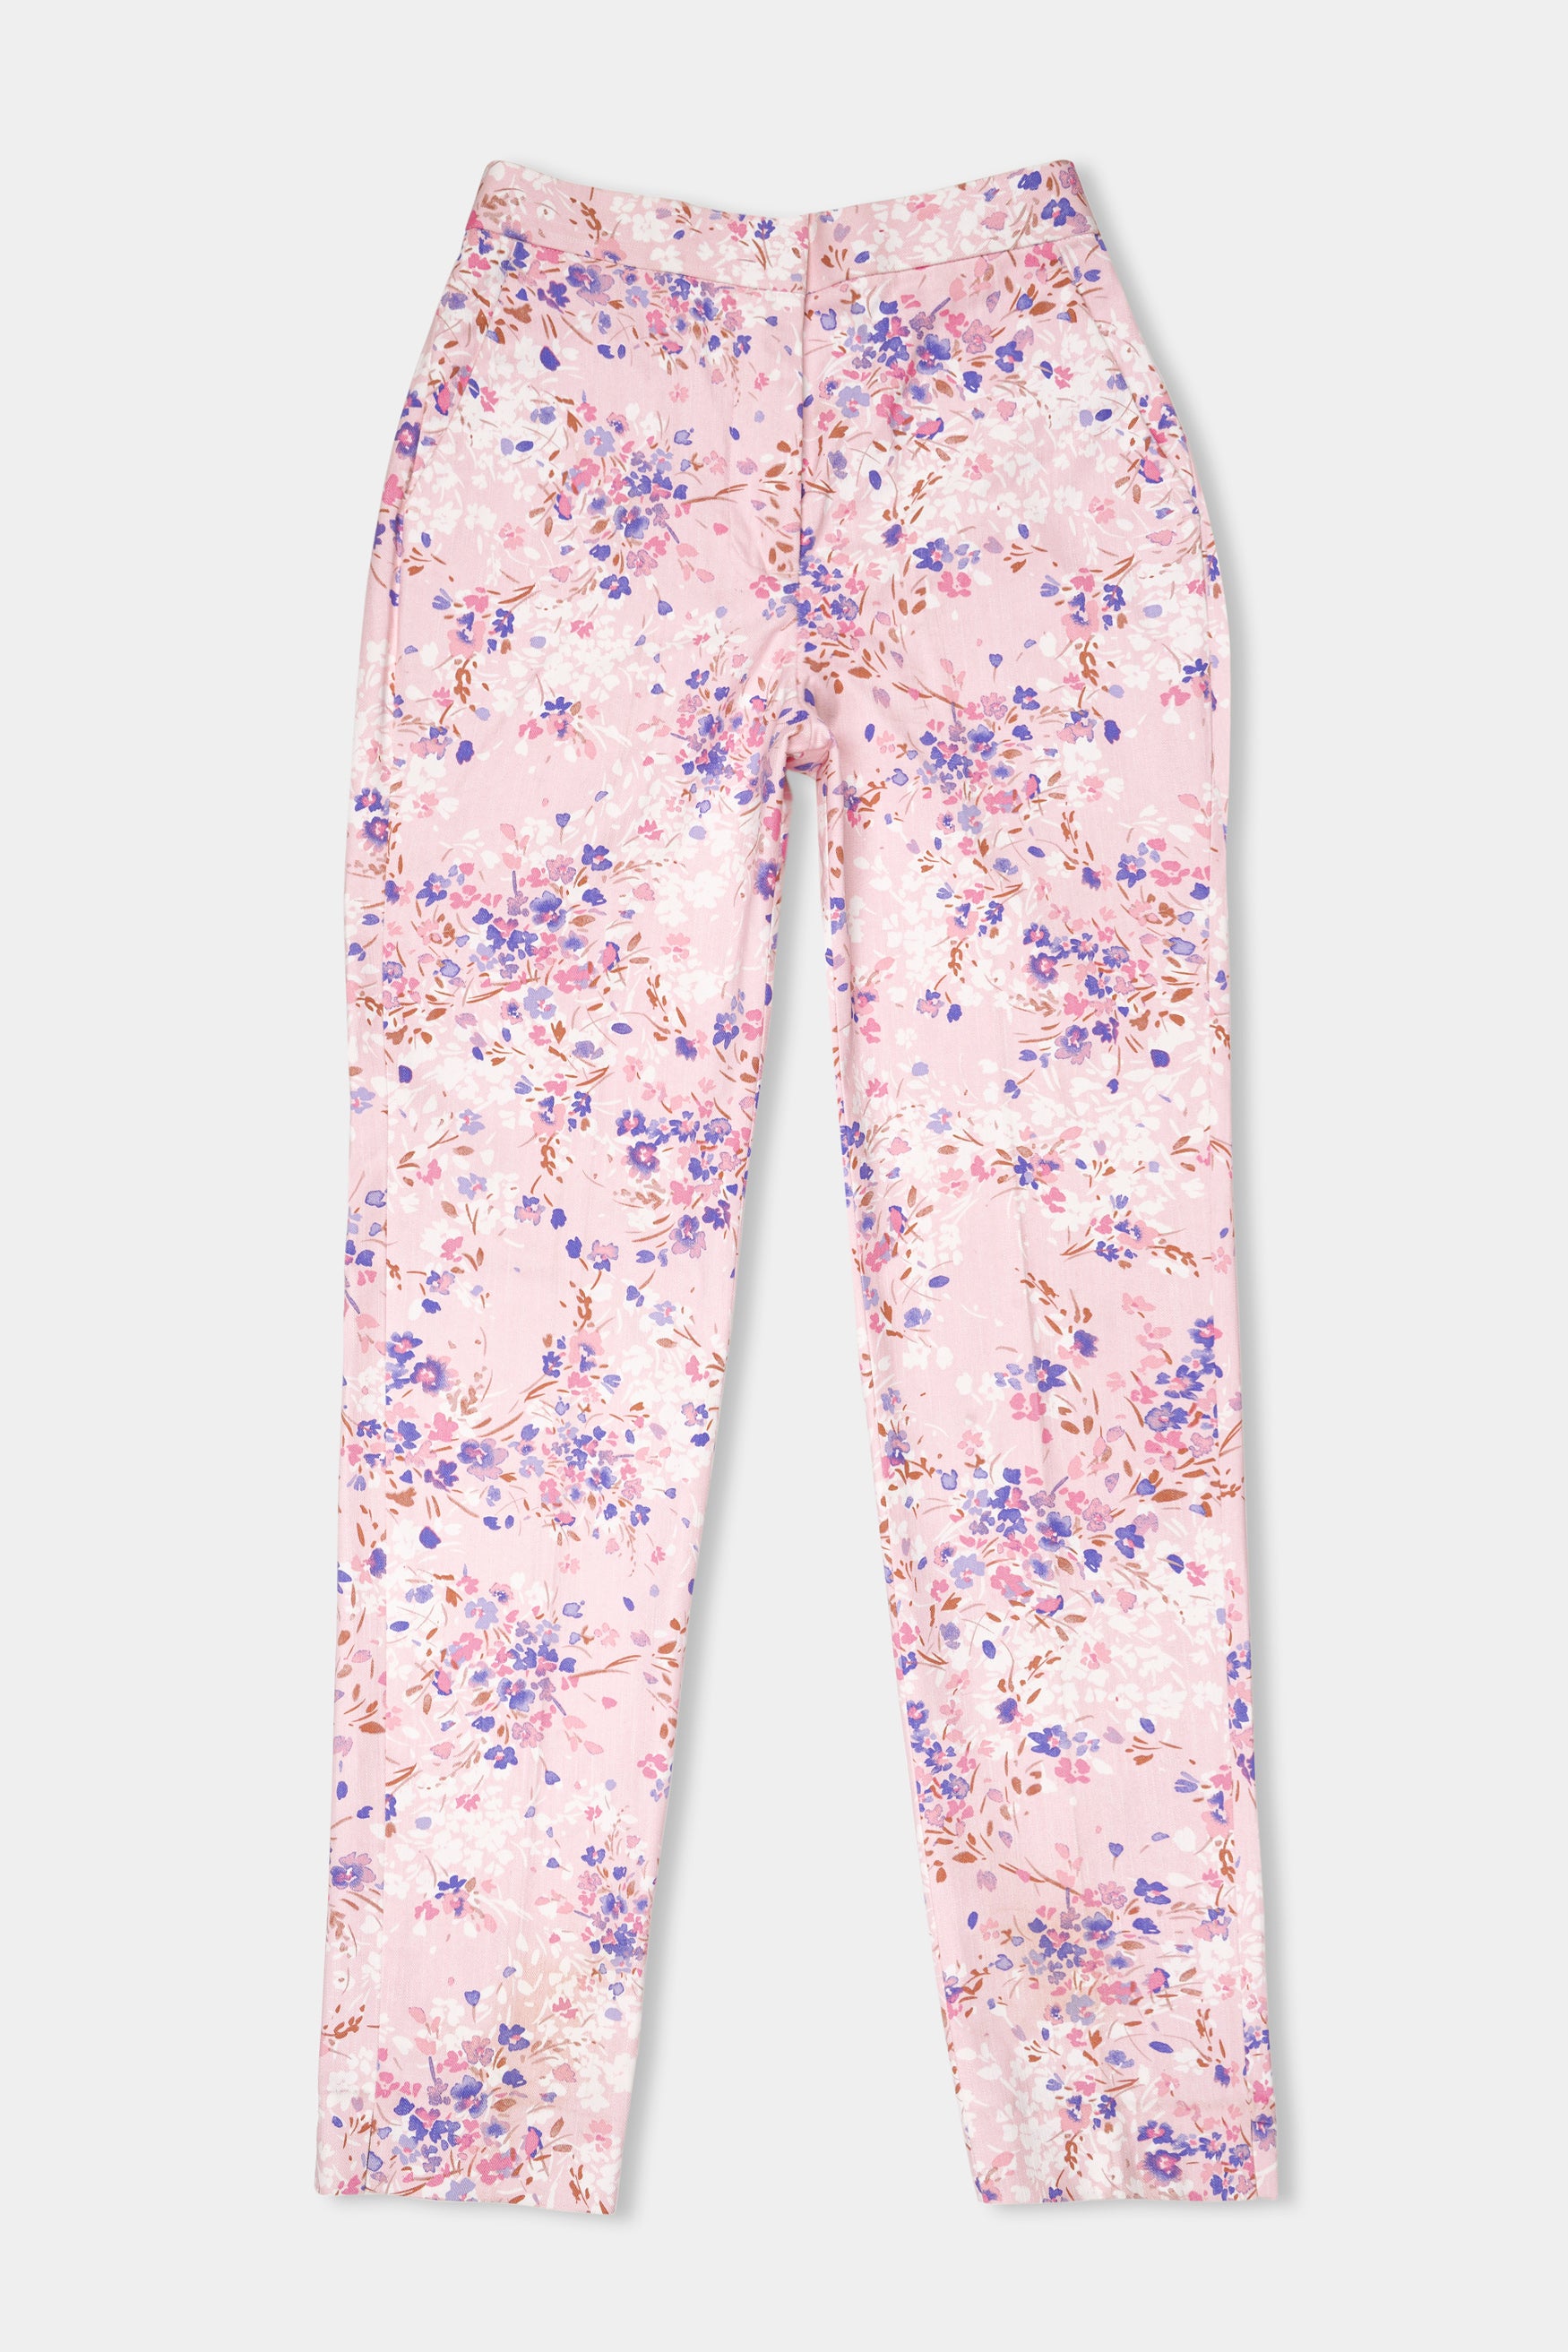 Gainsboro Pink and Scampi Blue Multicolour Ditsy Printed Premium Cotton Women’s Pant